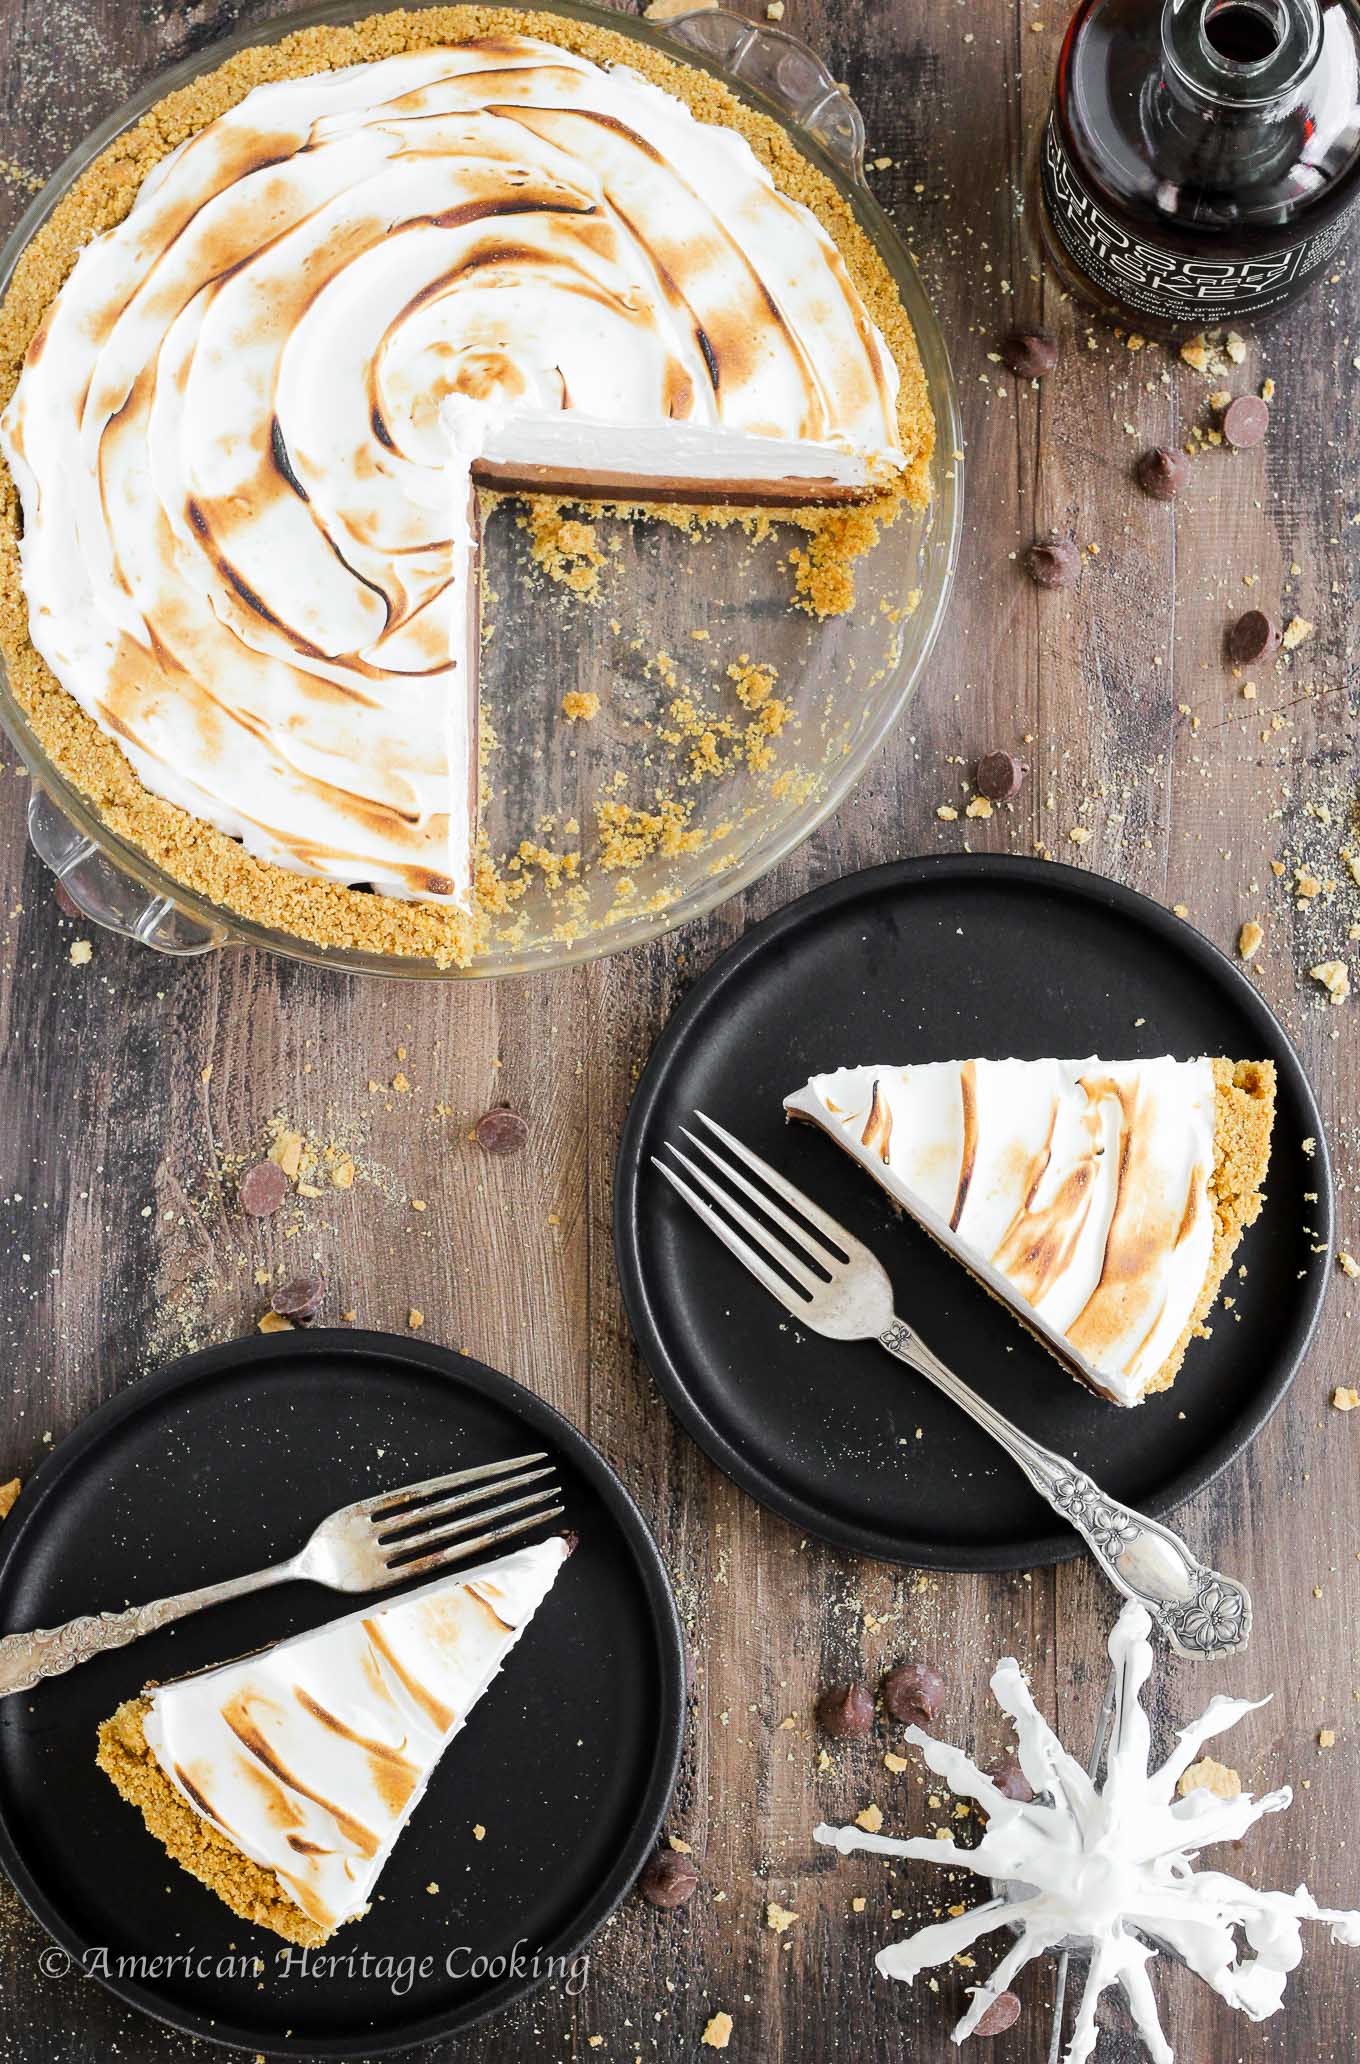 This No Bake Whiskey Smores Pie is a slice of Summer Heaven! There are layers of dark chocolate whisky ganache, milk chocolate mousse and fluffy toasted marshmallow in the perfect graham cracker crust. Go ahead…help yourself to another slice. 